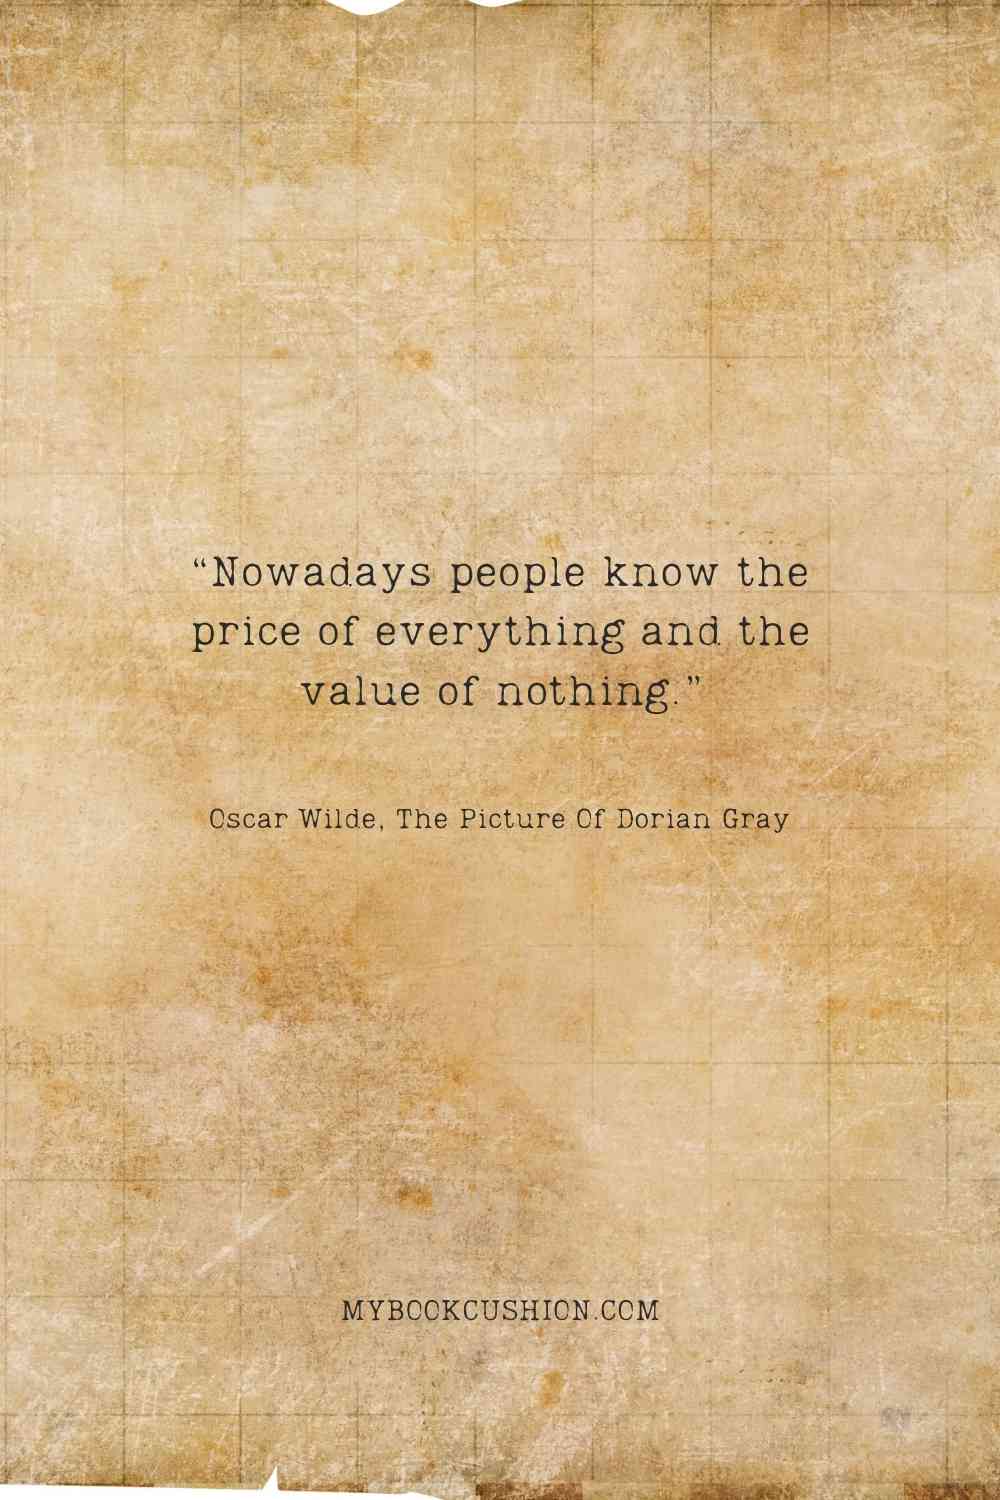 “Nowadays people know the price of everything and the value of nothing.” - Oscar Wilde, The Picture Of Dorian Gray